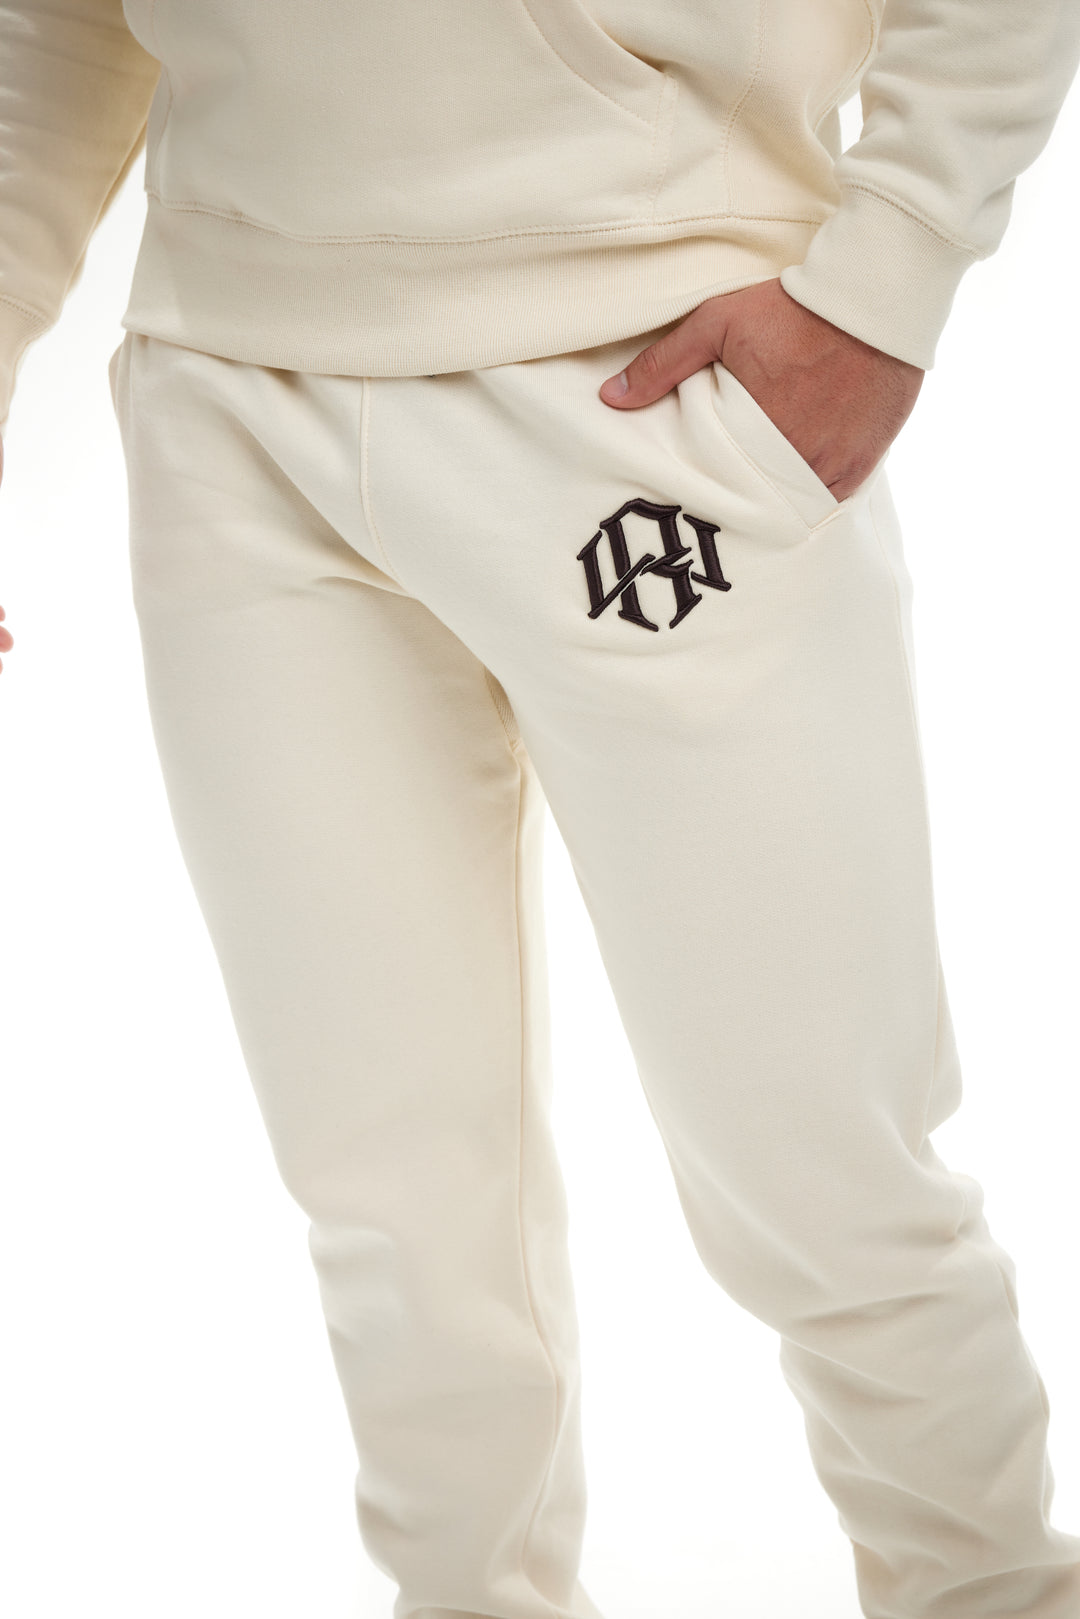 Premium 400gsm Heavyweight Cream Sweatpants modeled by a young man 